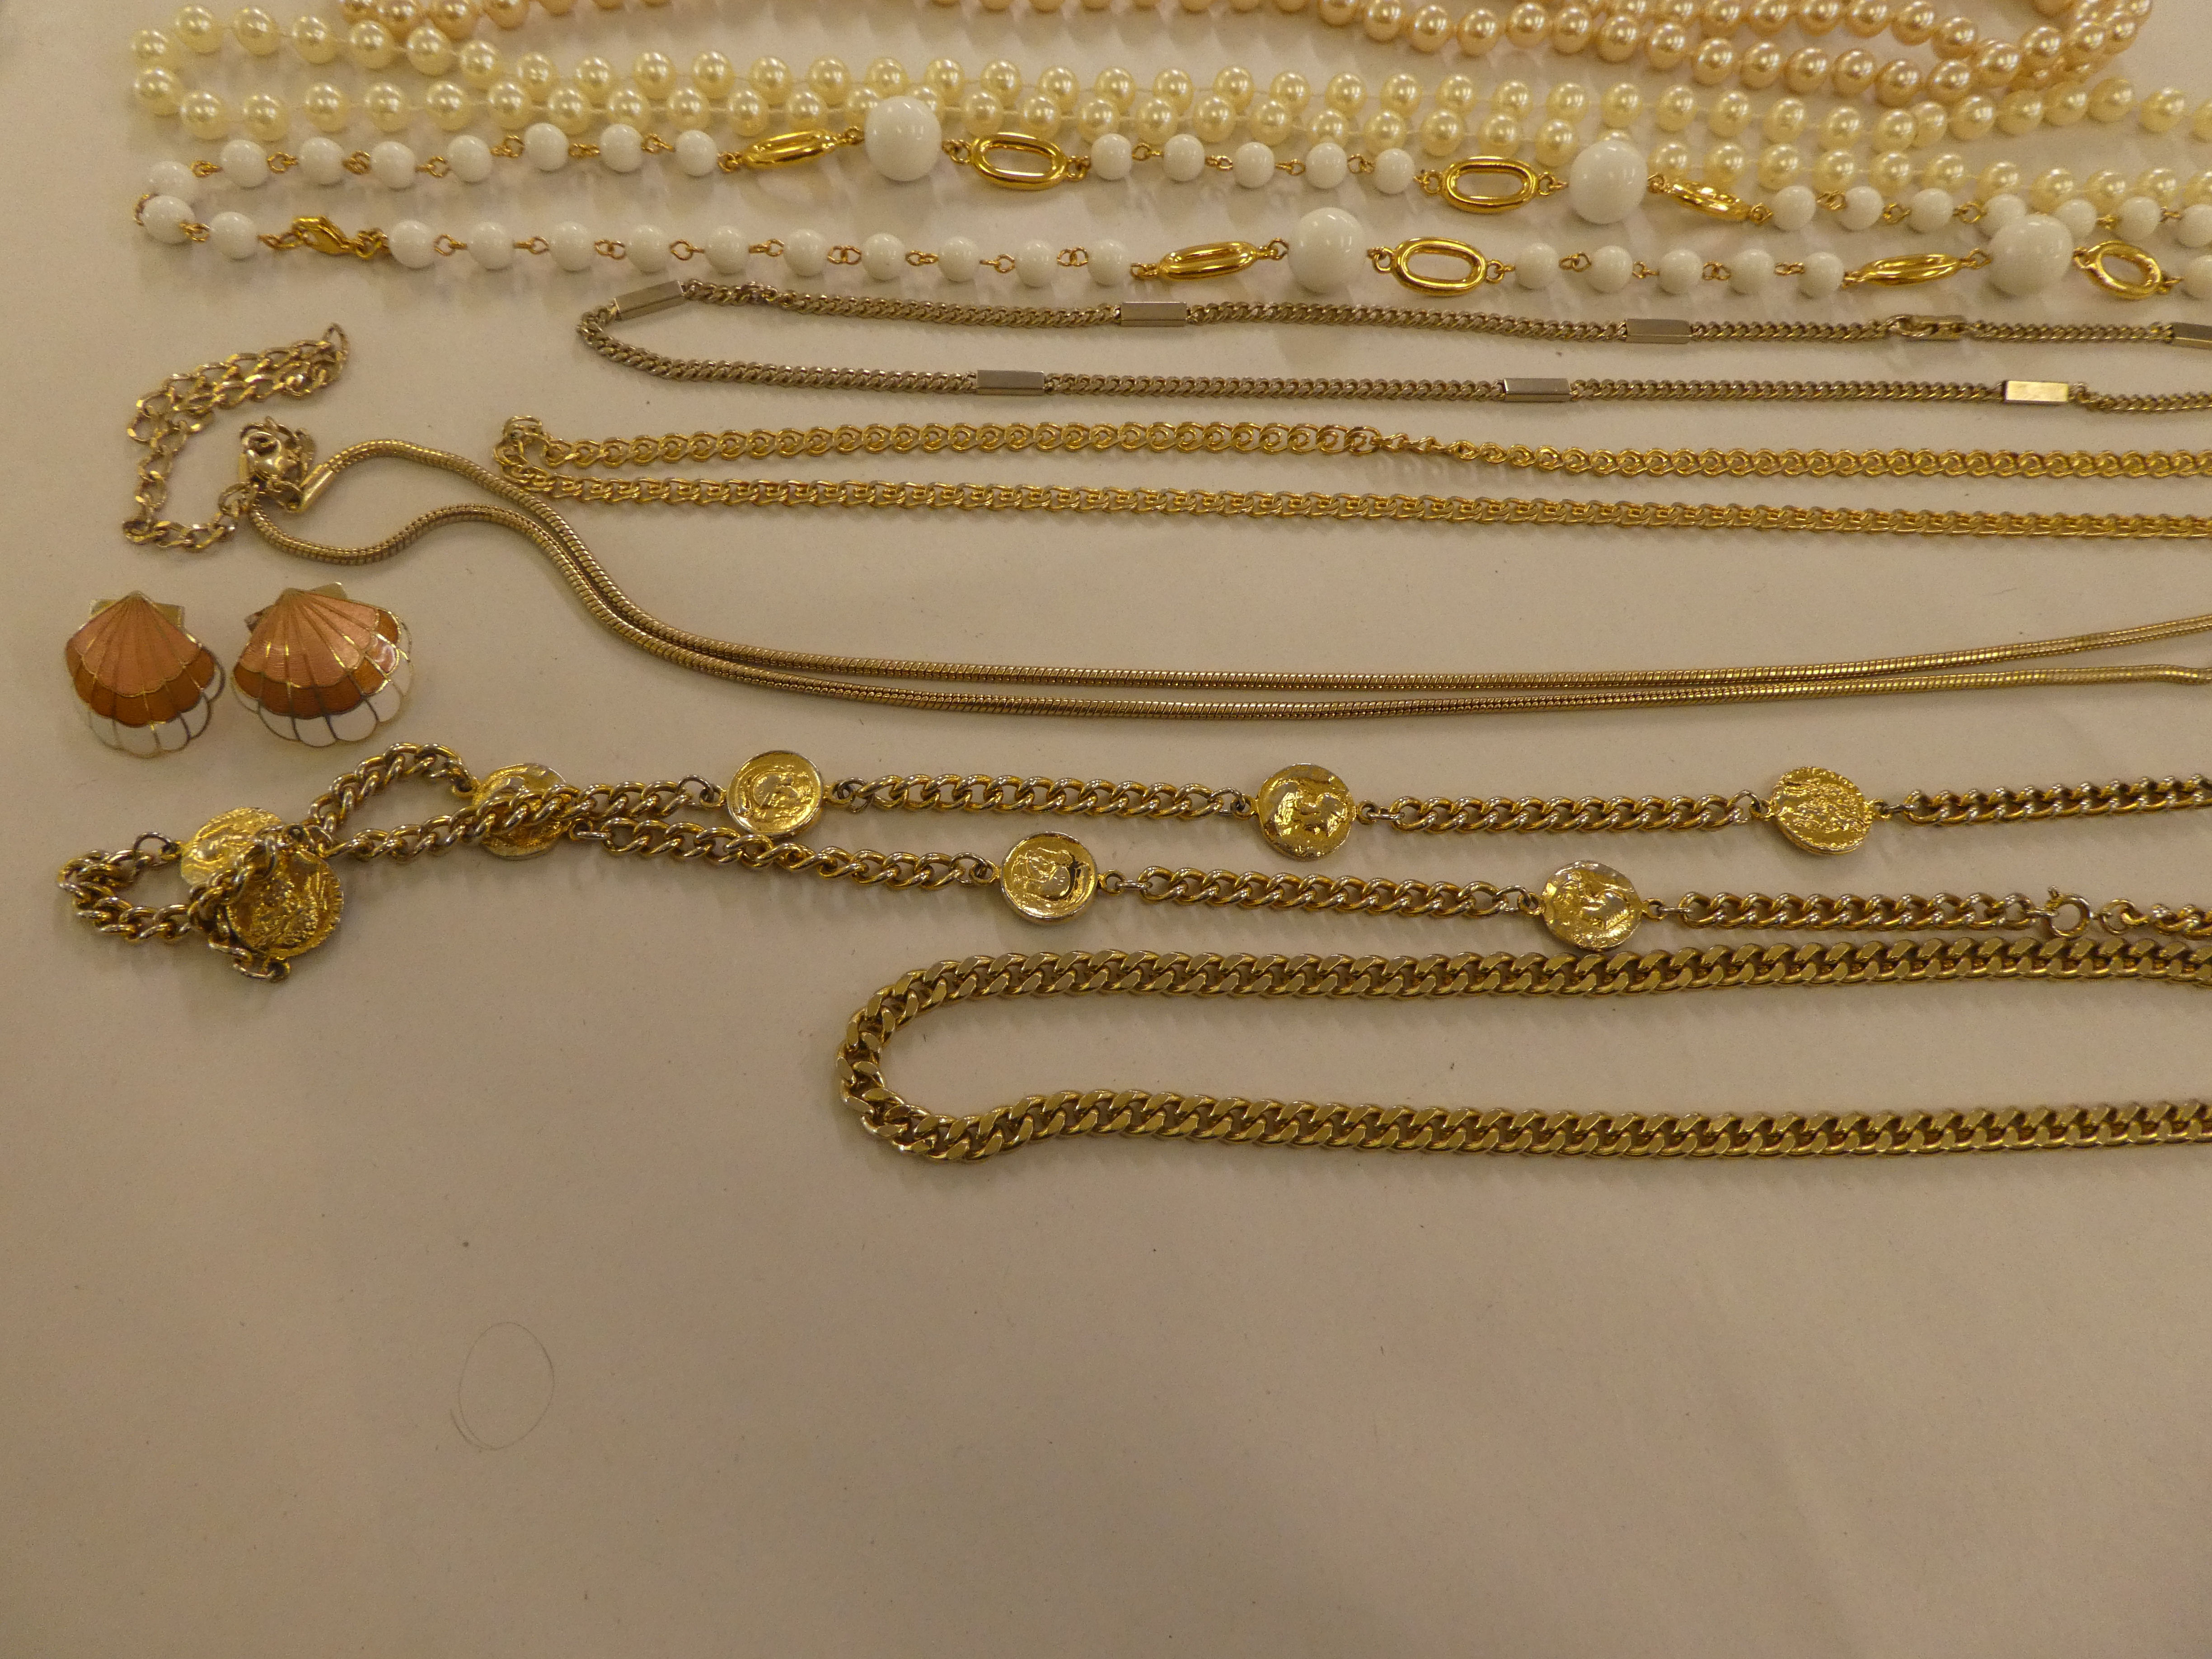 Costume jewellery and items of personal ornament: to include simulated pearls - Image 8 of 11